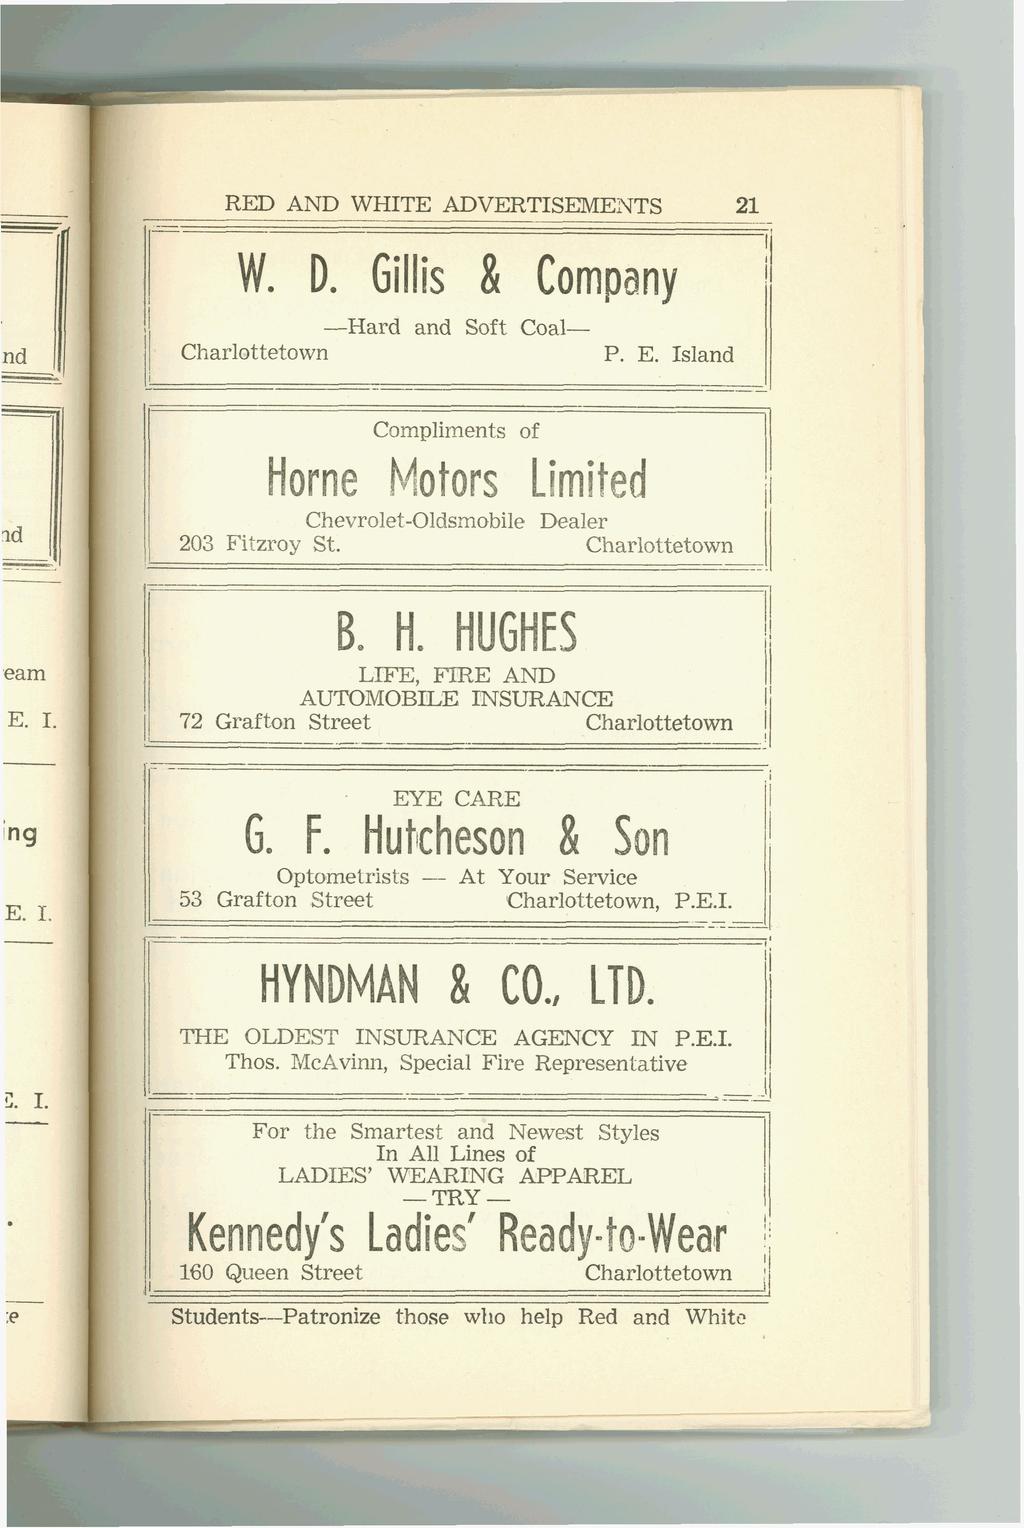 RED AND WHITE ADVERTISEMENTS 21 W. D. Gillis & Company Hard and Soft Coal Horne Motors Limited ChevroletOldsmobile Dealer 203 Fitzroy St. Be H. HUGHES LIFE, J?